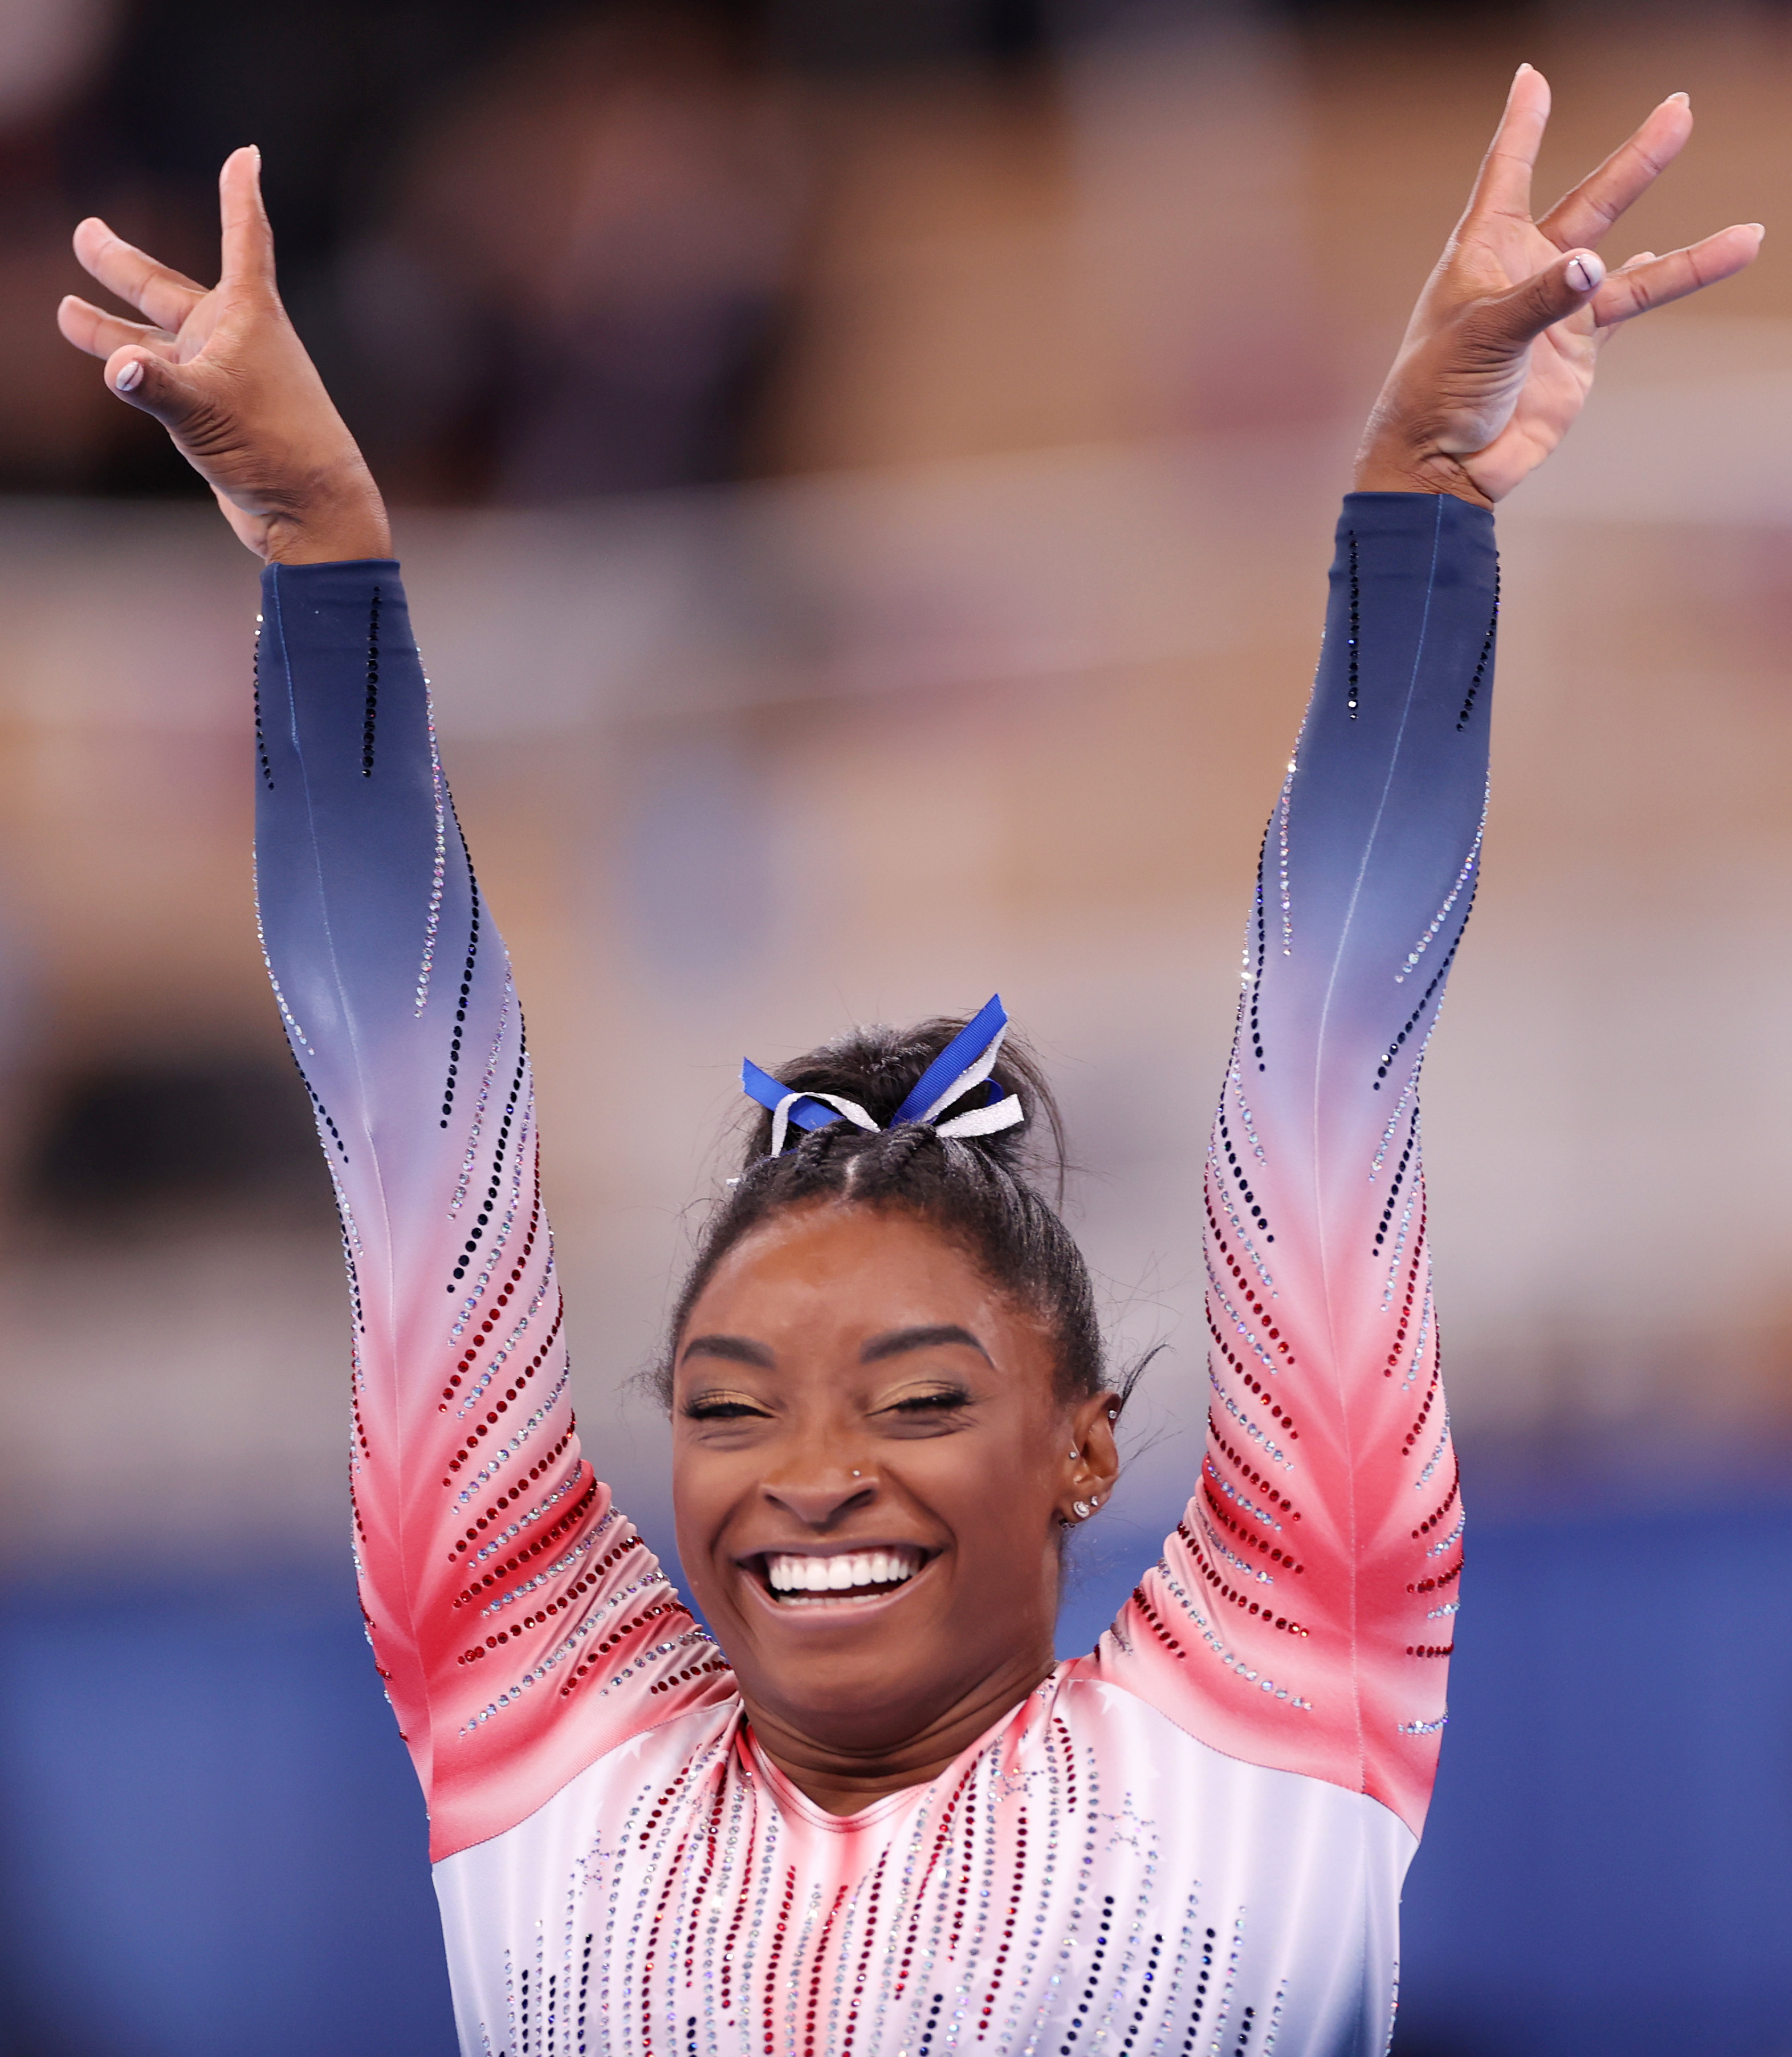 Simone Biles of Team United States competes in the Women's Balance Beam Final on day eleven of the Tokyo 2020 Olympic Games at Ariake Gymnastics Centre on August 03, 2021 in Tokyo, Japan. | Source: Getty Images